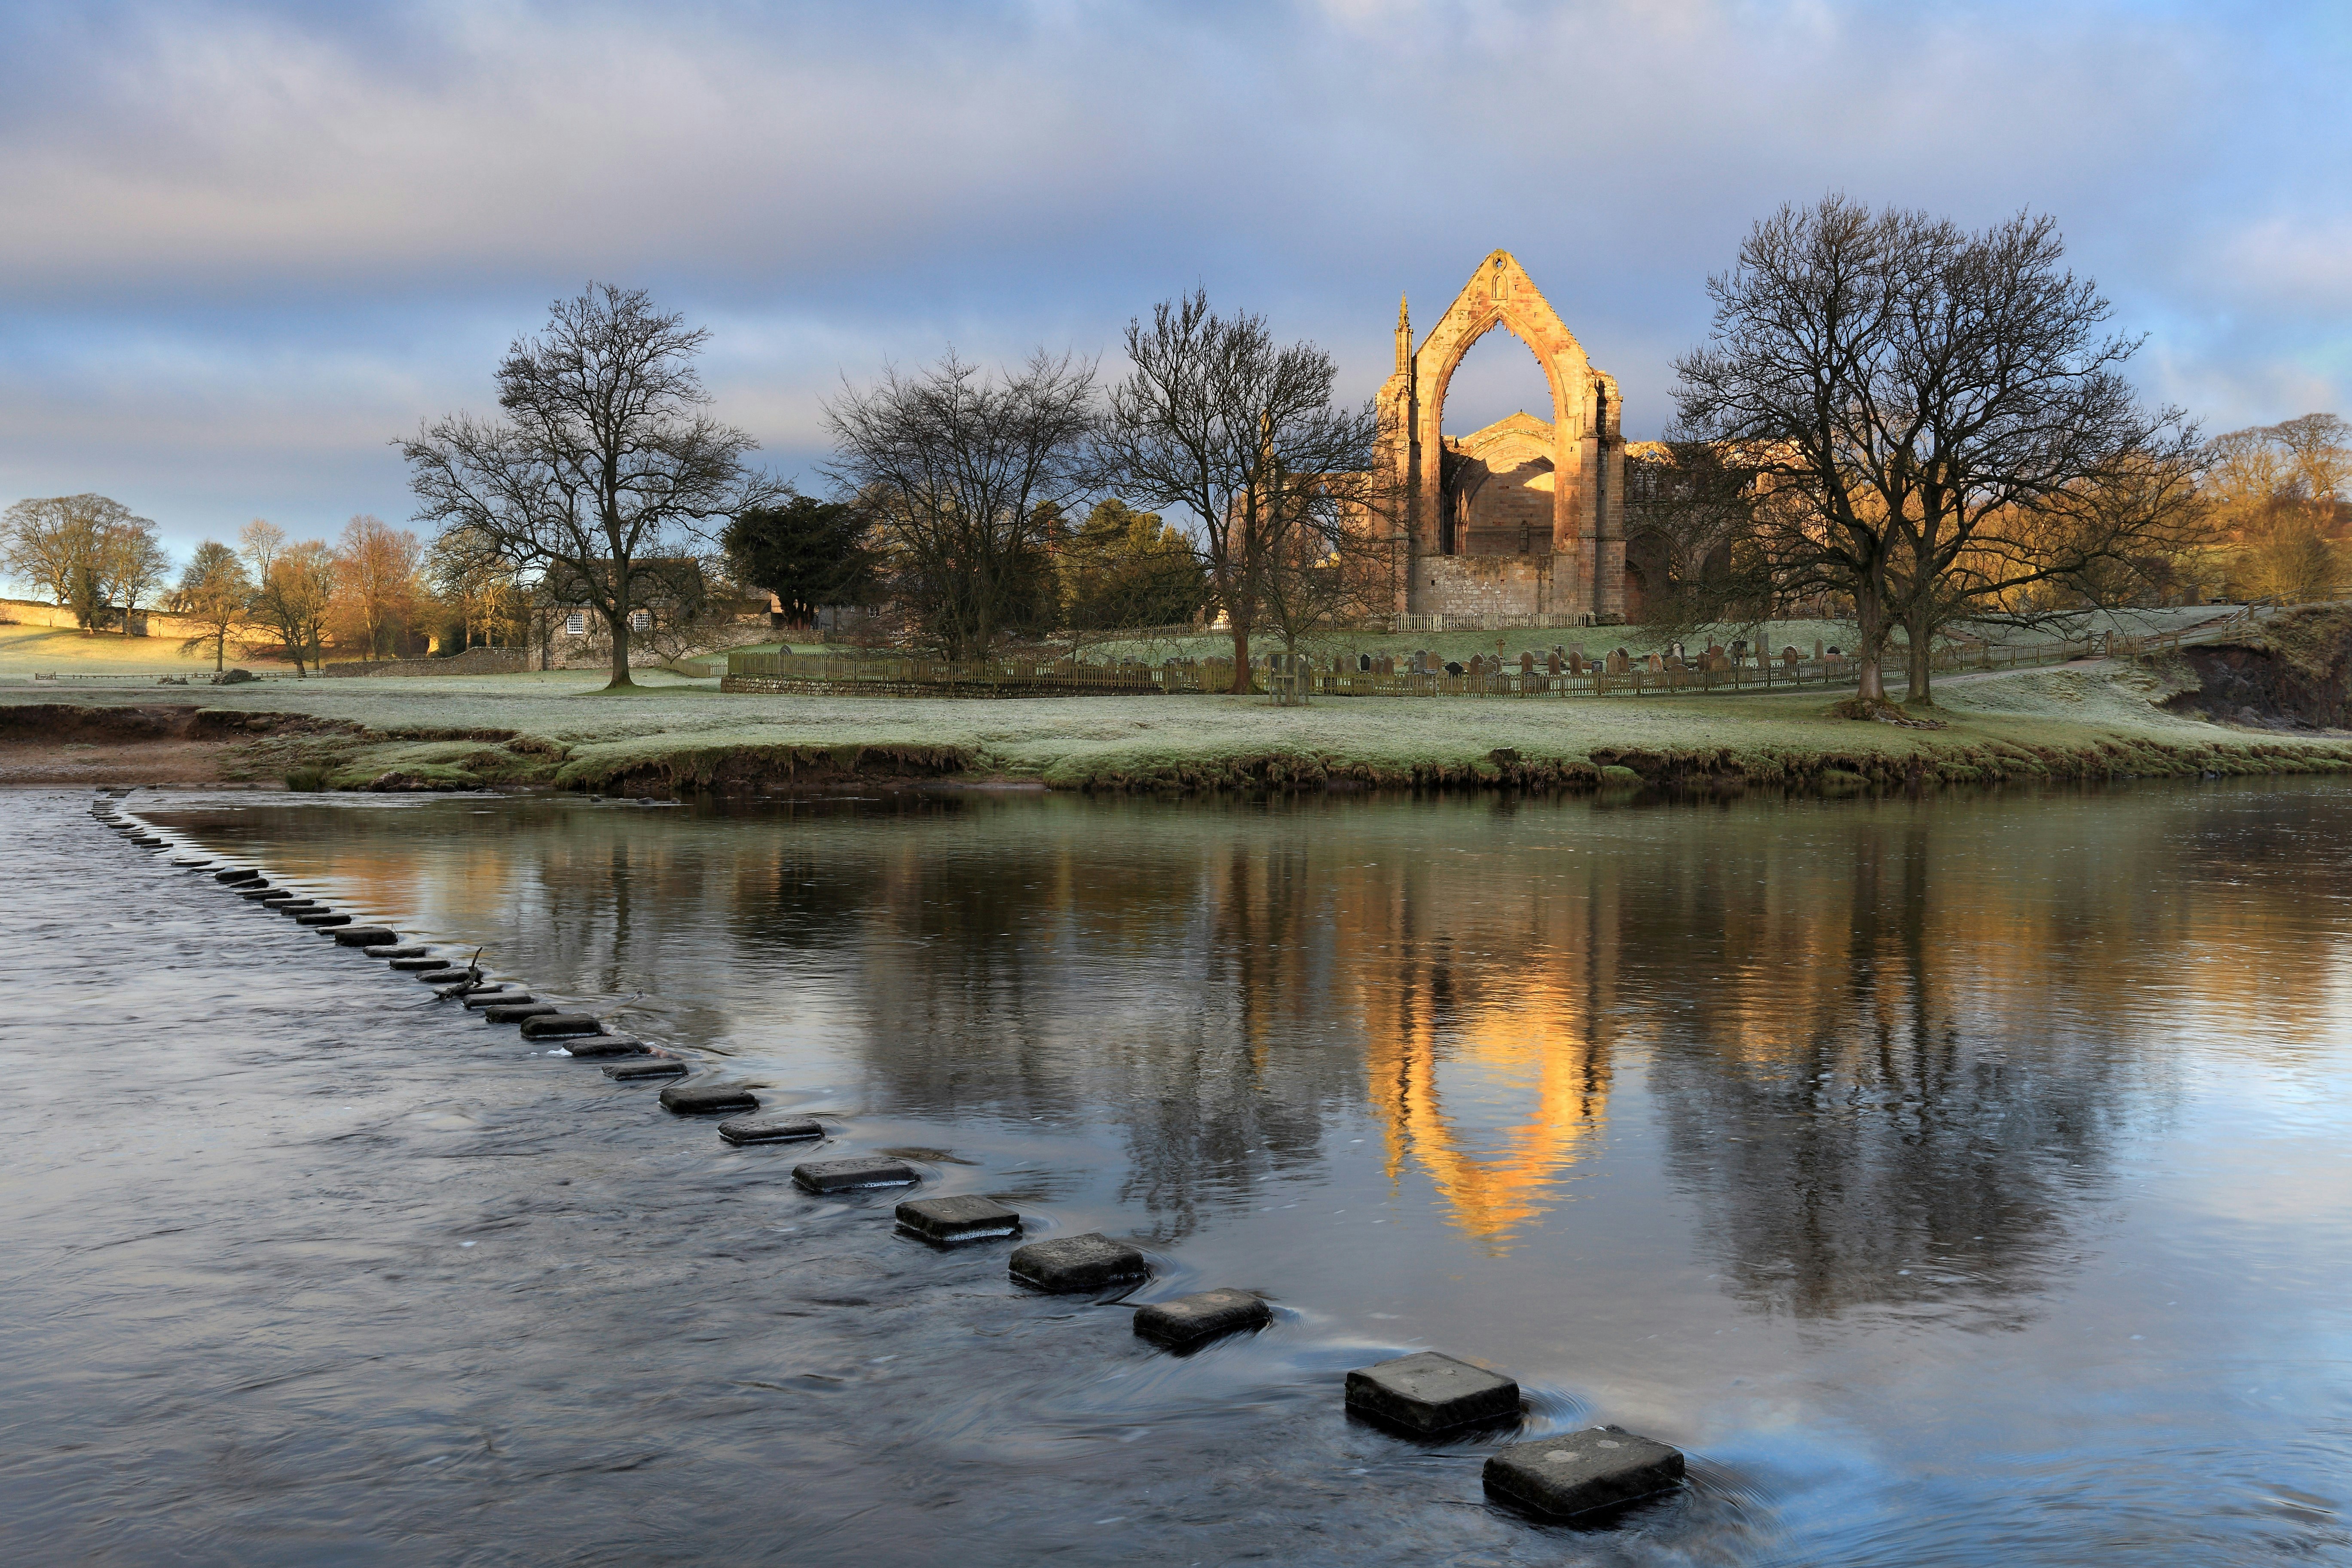 A view of Bolton Abbey, as seen from the opposite bank of the River Wharfe. A series of stepping stones span the river, while the grand abbey is flanked by woodland.